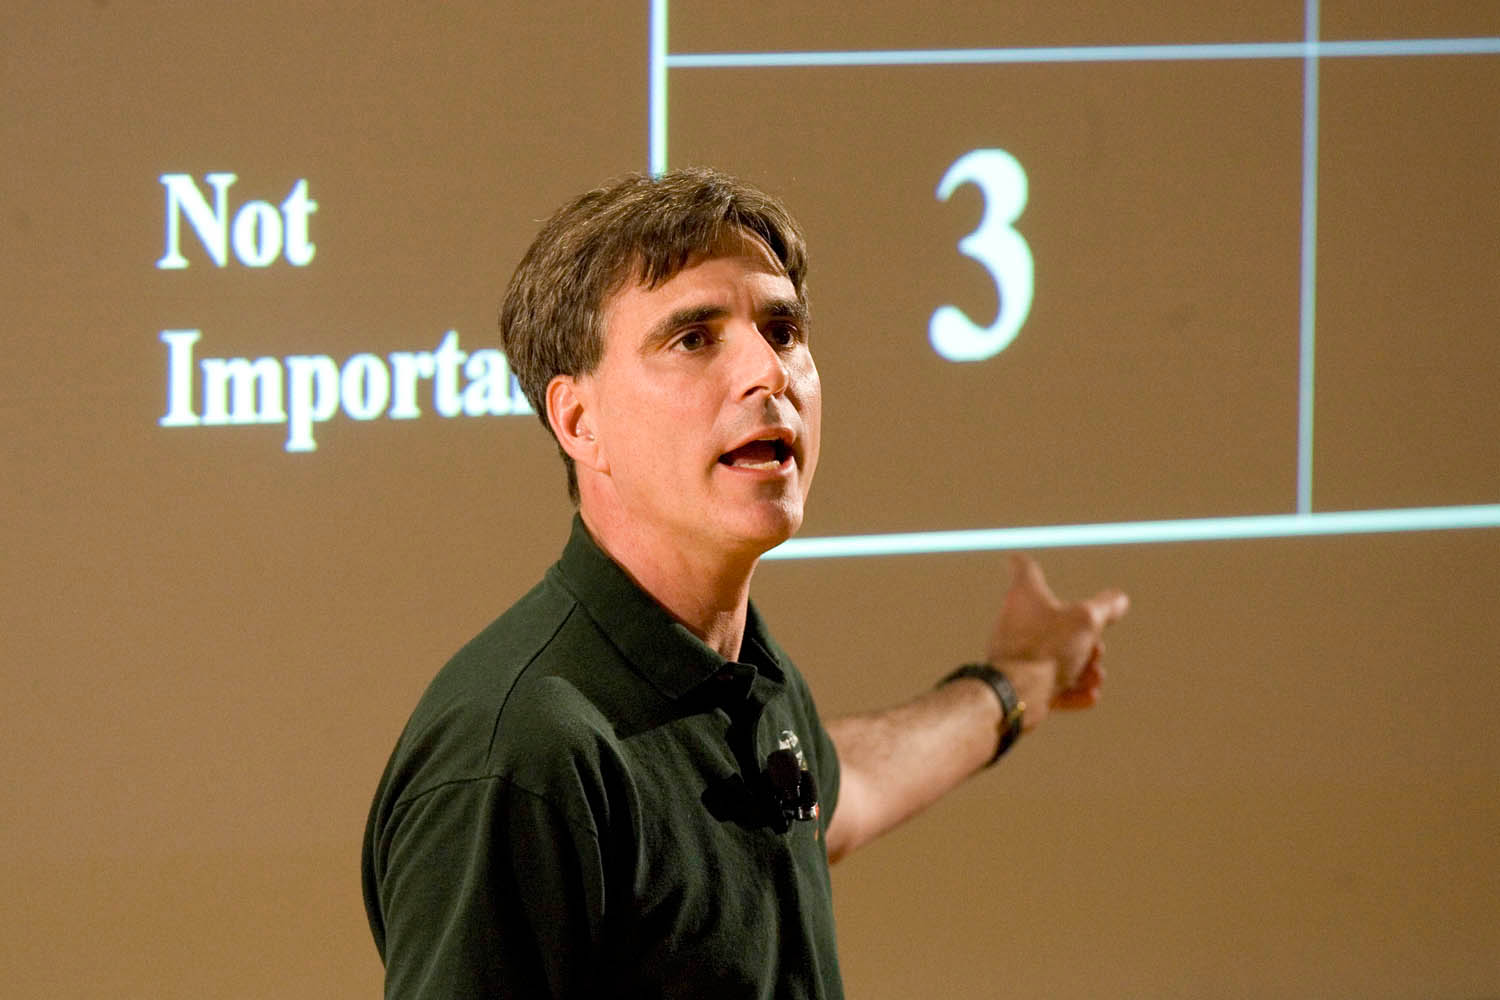 The Last Lecture of Randy Pausch